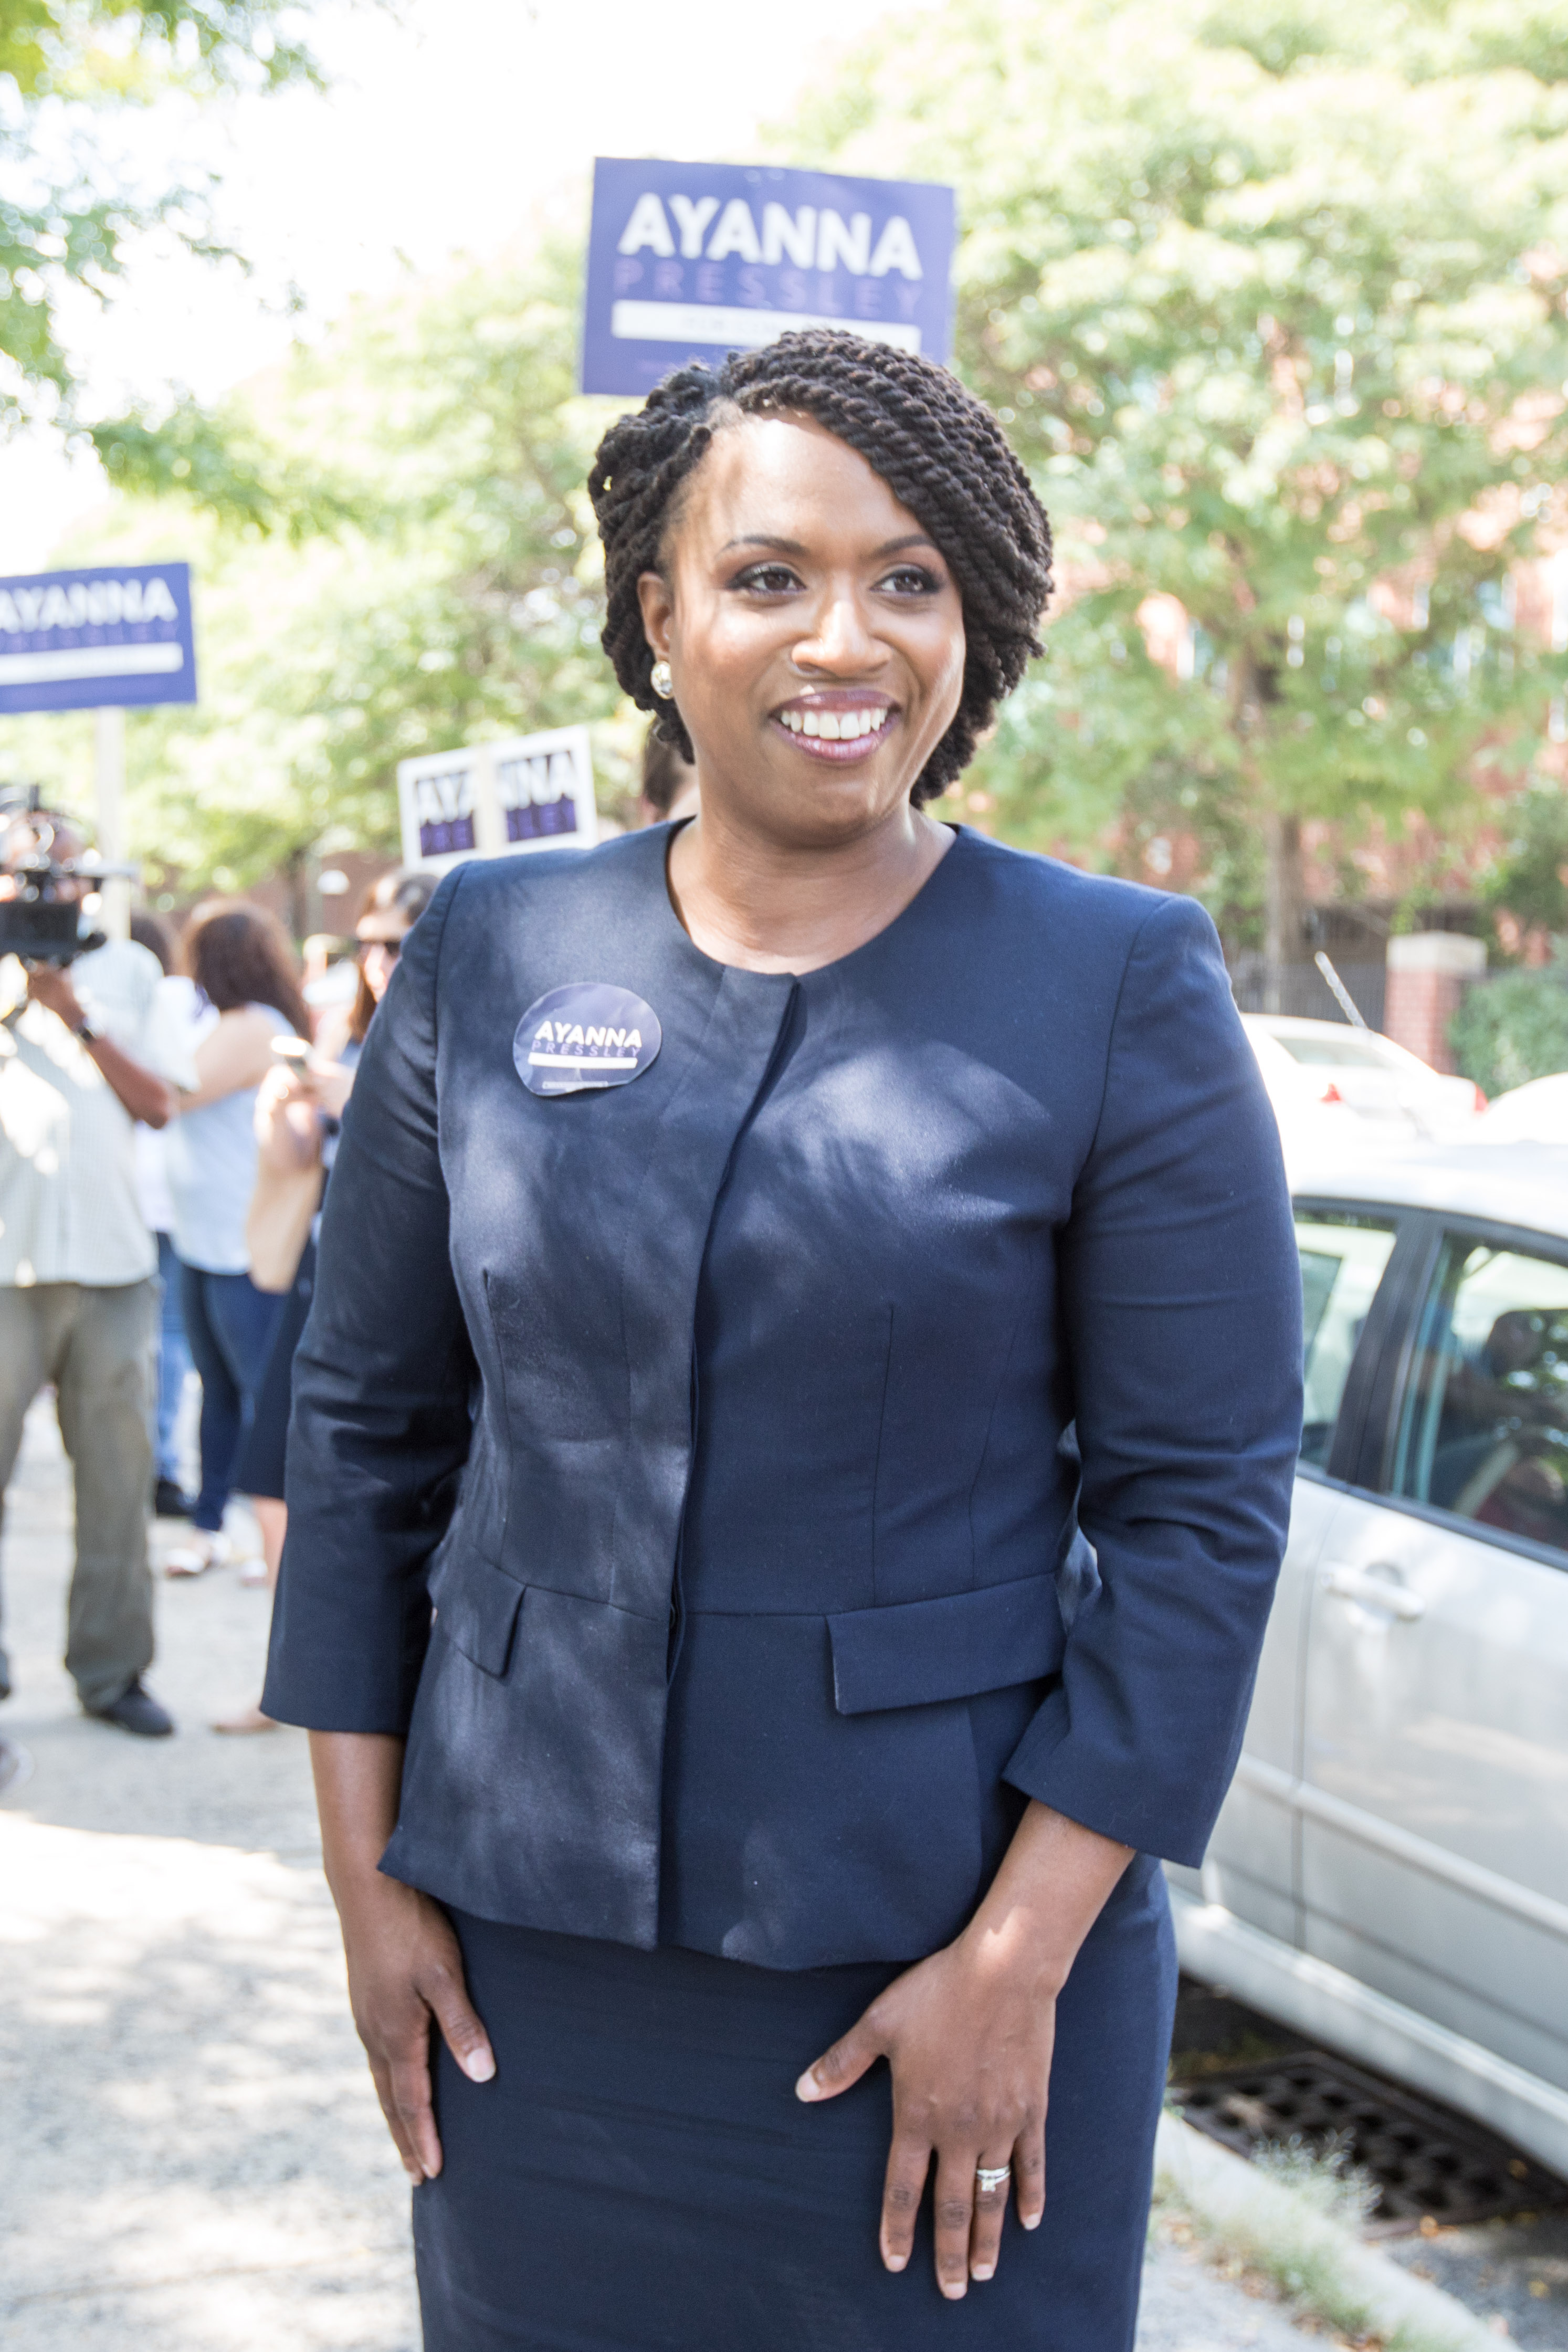 Boston City Councilwomen And House Democratic Candidate Ayanna Pressley Campaigns On Primary Day